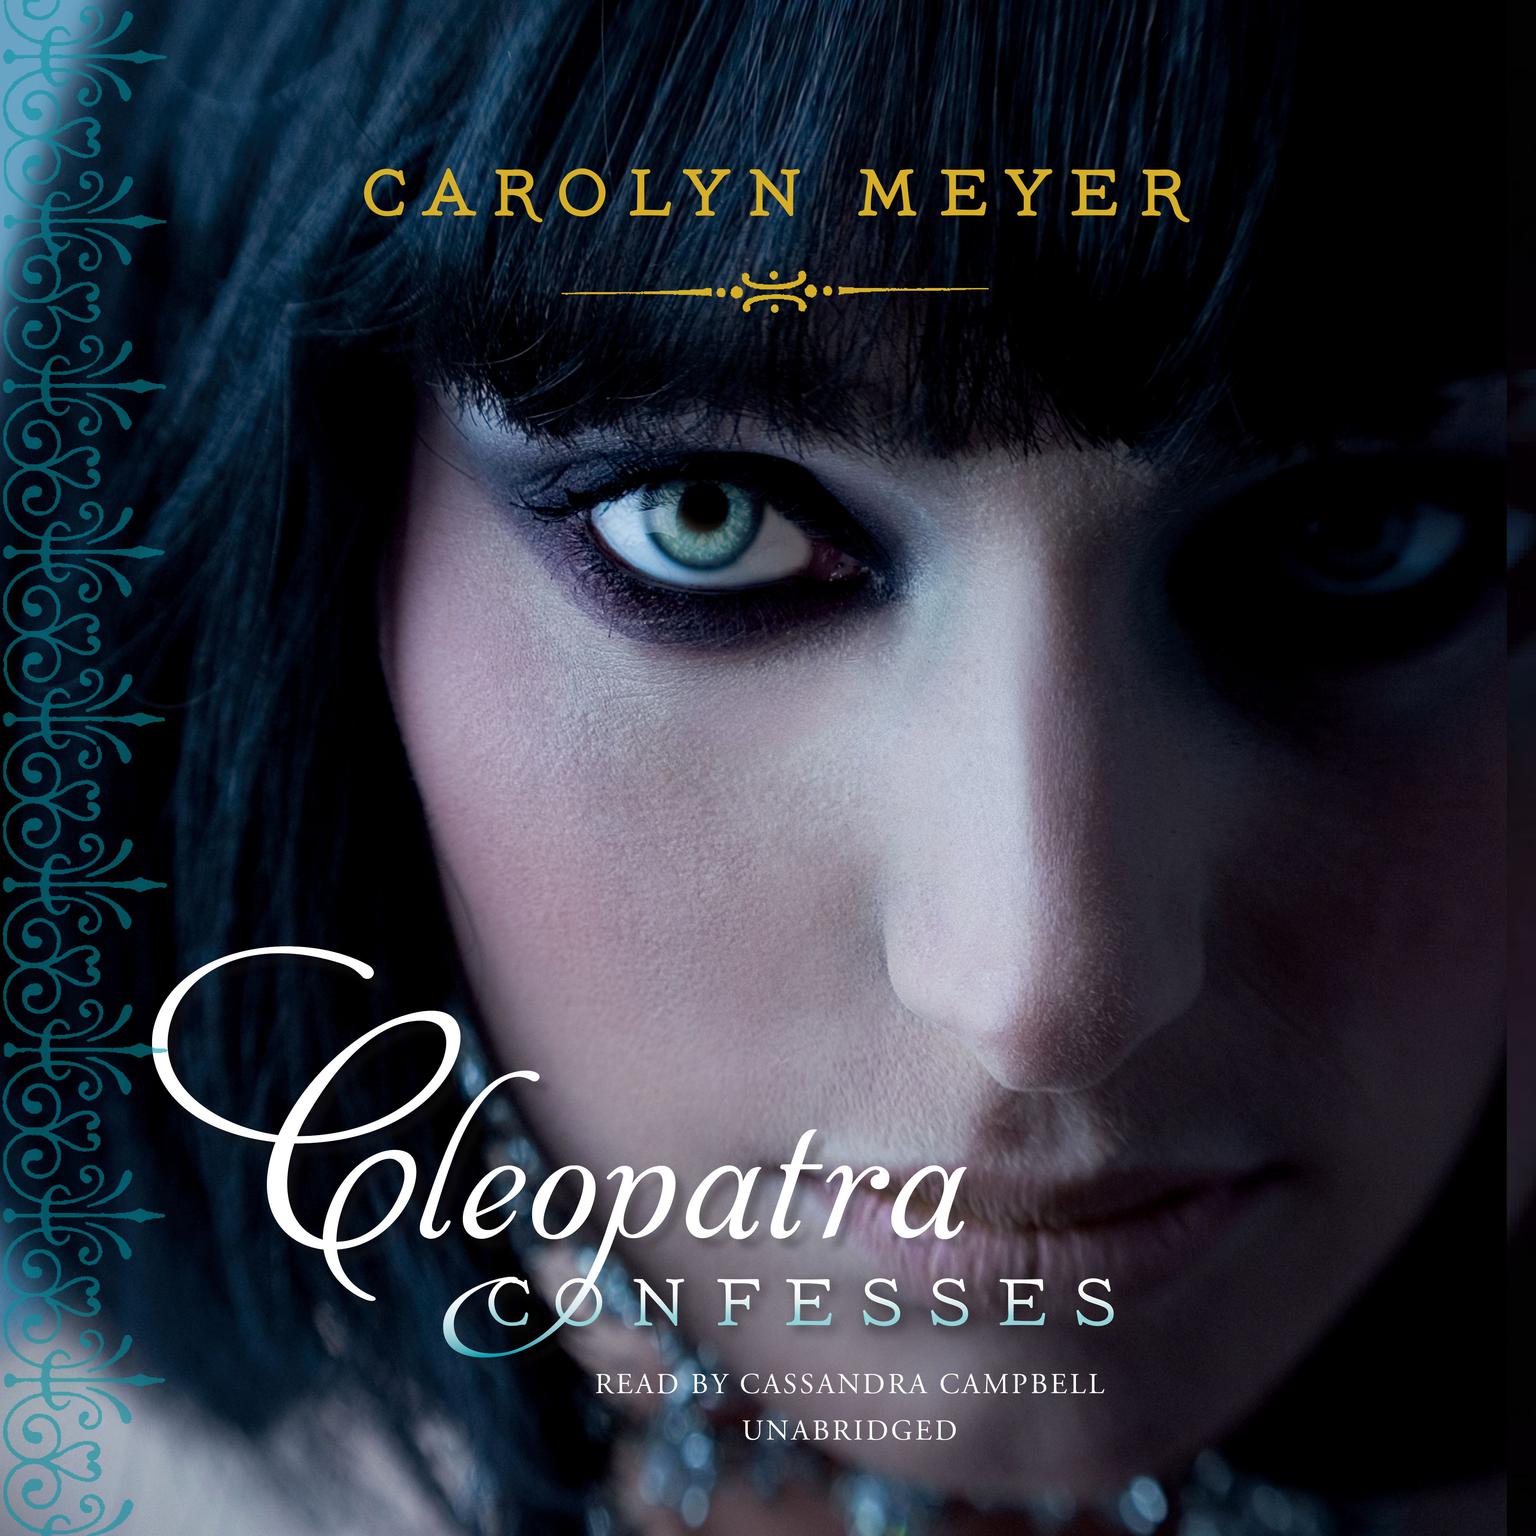 cleopatra confesses by carolyn meyer